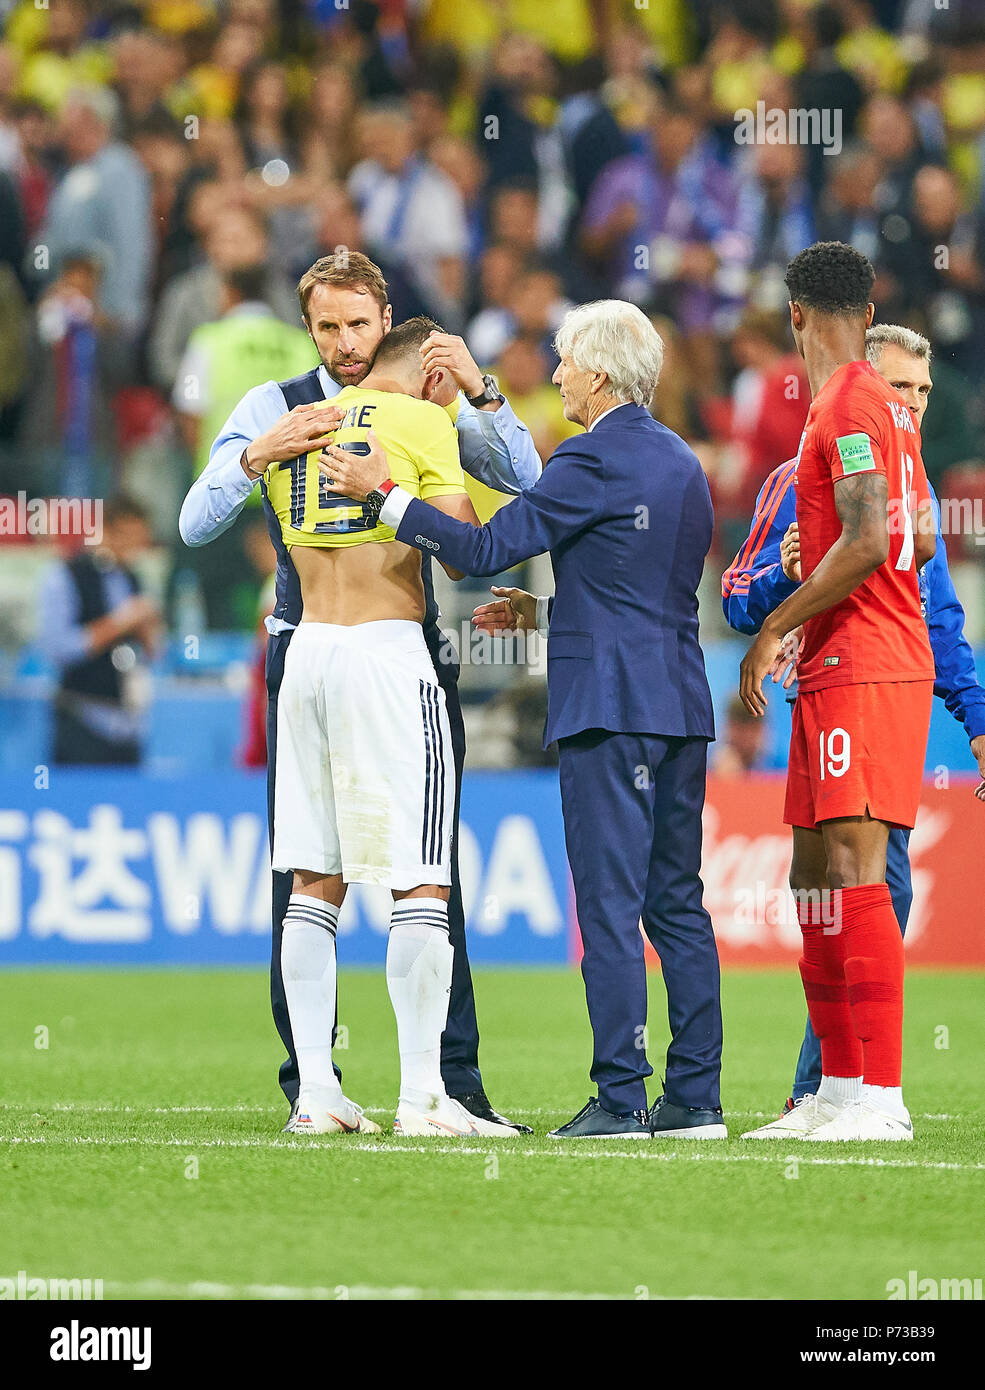 England- Columbia, Soccer, Moscow, July 03, 2018 Gareth Southgate, headcoach England, Jose PEKERMAN, ARG, Columbia headcoach, with the sad Mateus URIBE, Columbia Nr.15  ENGLAND - COLUMBIA 1-1, 4-3 after penalty shoot-out FIFA WORLD CUP 2018 RUSSIA, Season 2018/2019,  July 03, 2018 S p a r t a k Stadium in Moscow, Russia. © Peter Schatz / Alamy Live News Stock Photo